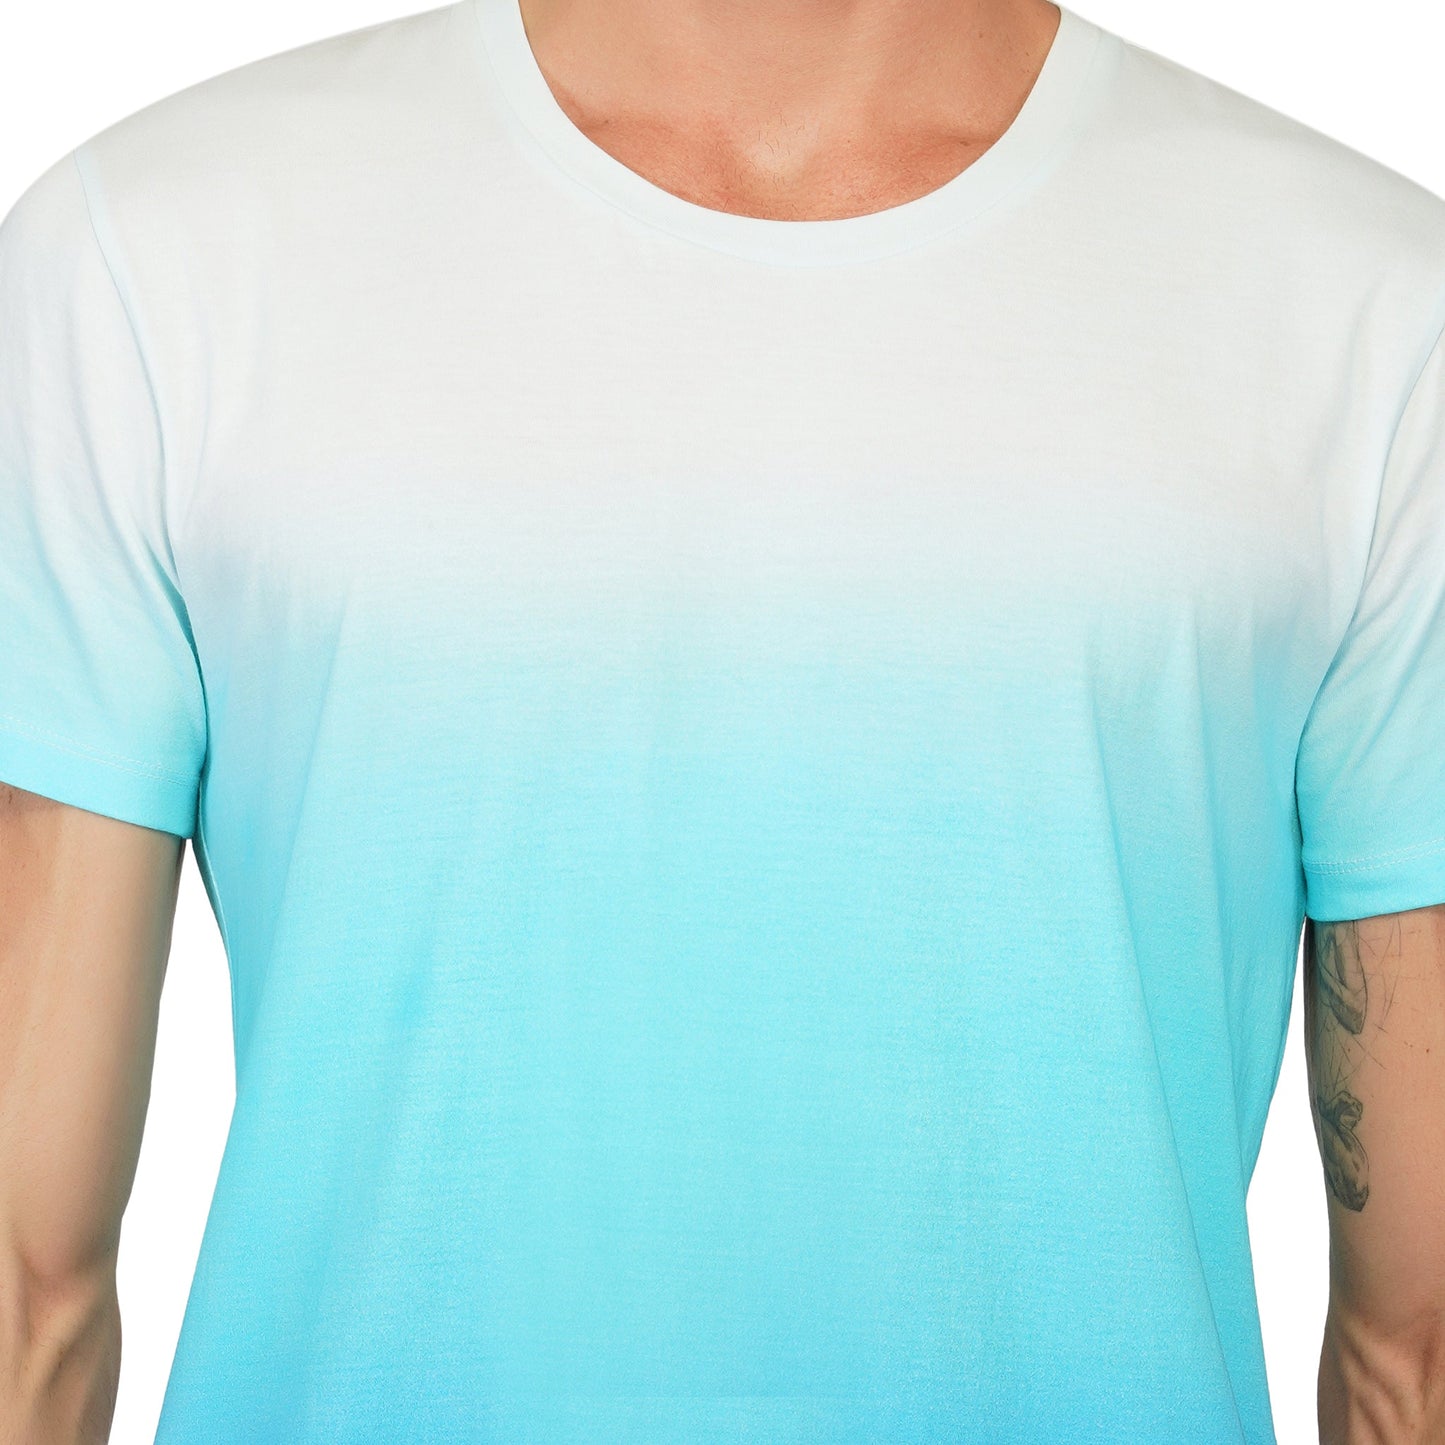 SLAY. Men's White to Blue Ombre T Shirt